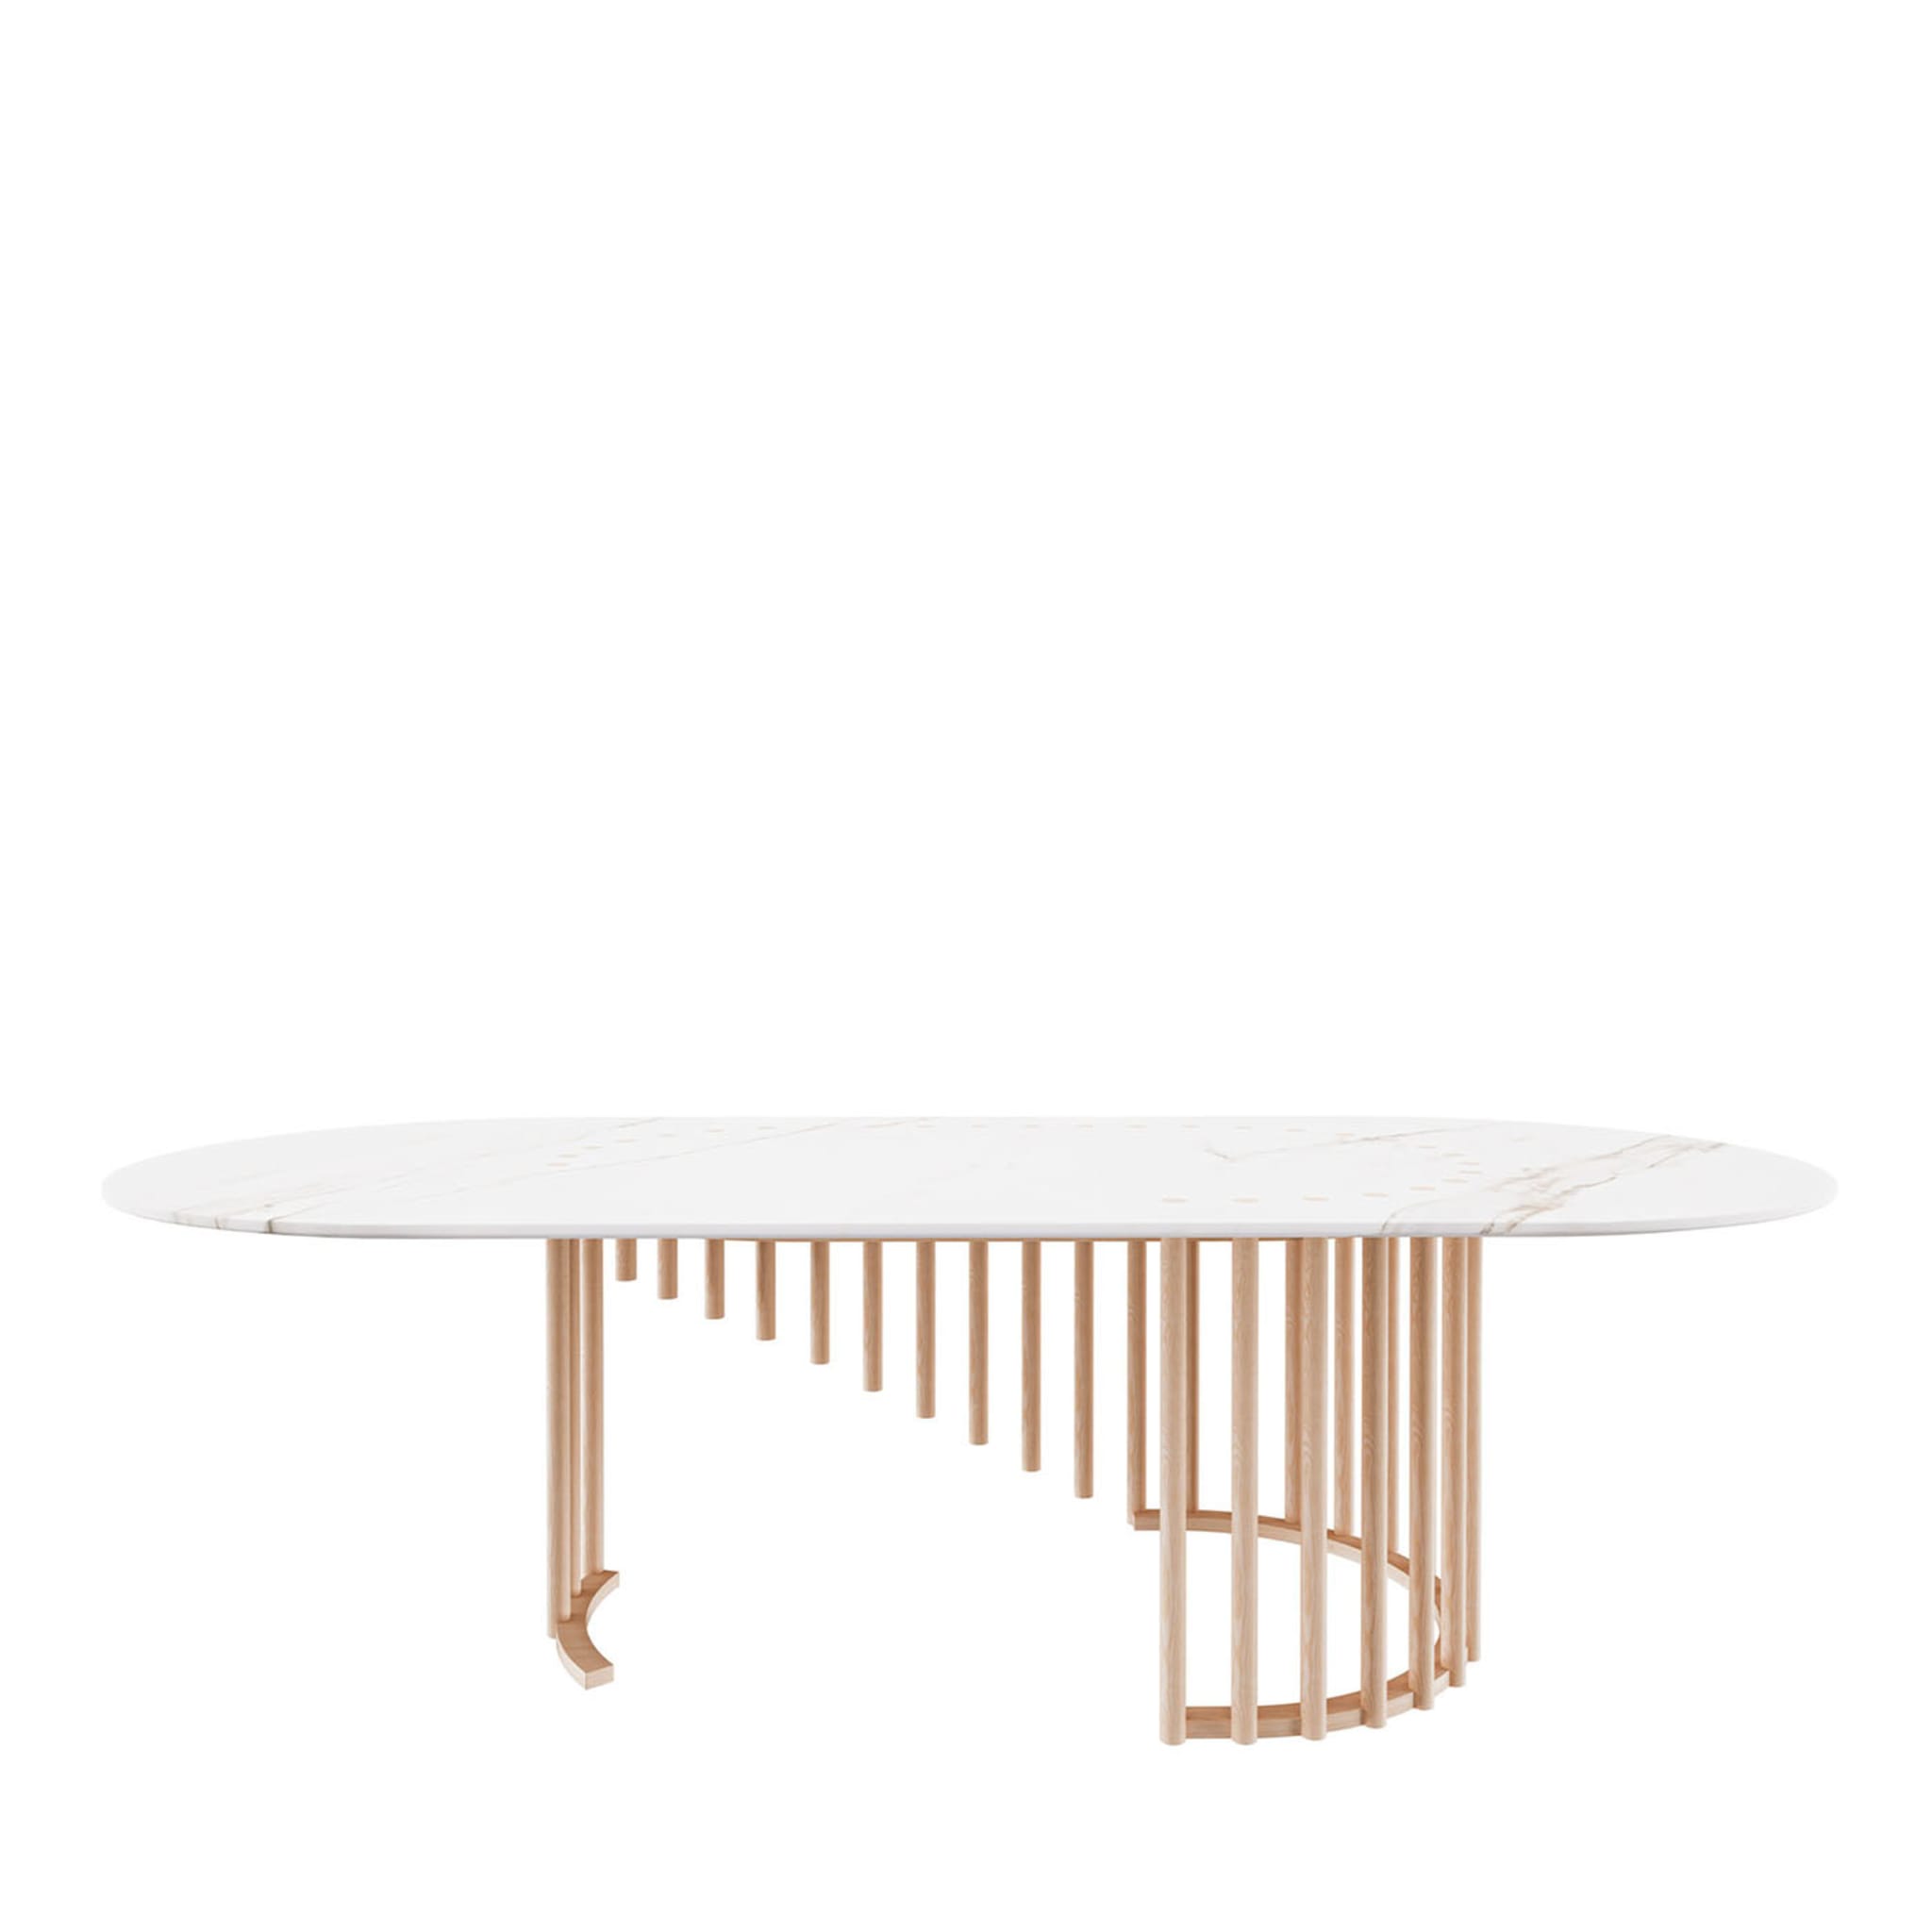 Giunchi Cocktail Table by Hebanon Studio - Main view